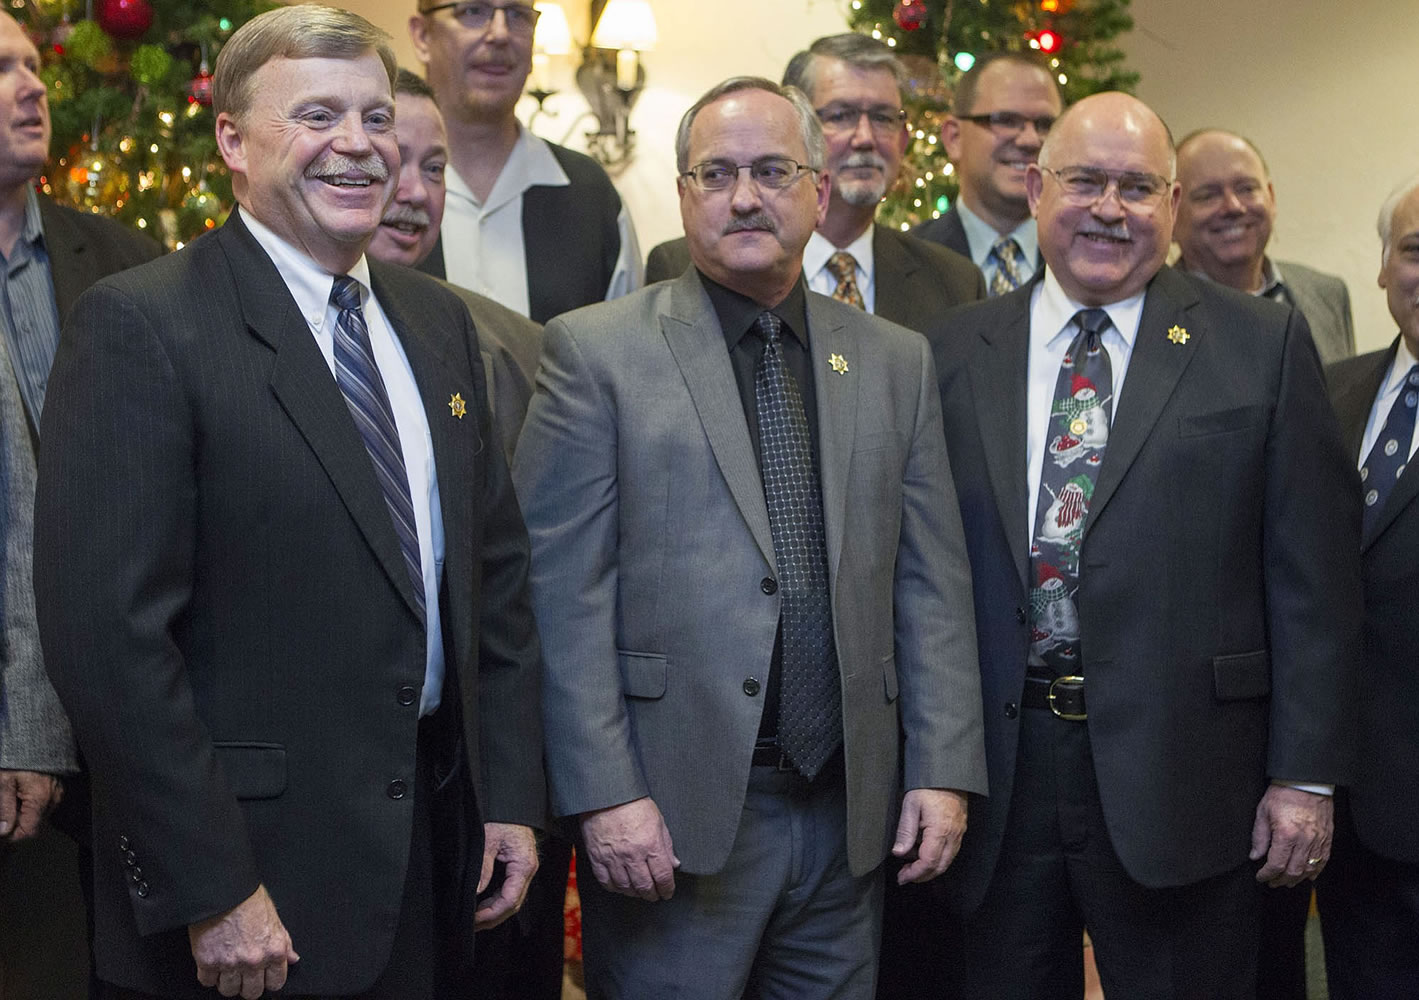 From left, Chief Criminal Deputy Mike Evans, Undersheriff Joe Dunegan and Sheriff Garry Lucas take photos with speakers at their retirement party at the Heathman Lodge Tuesday evening.